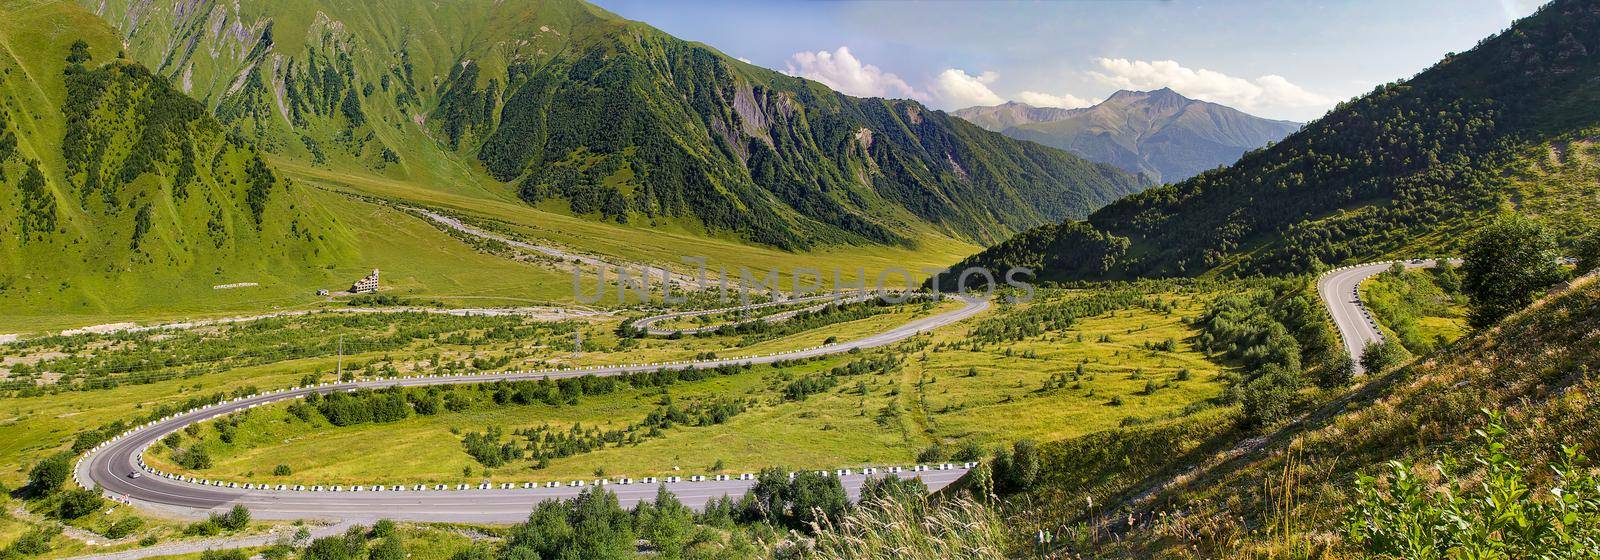 Panorama from a winding road on the border of North Ossetia with South Ossetia.